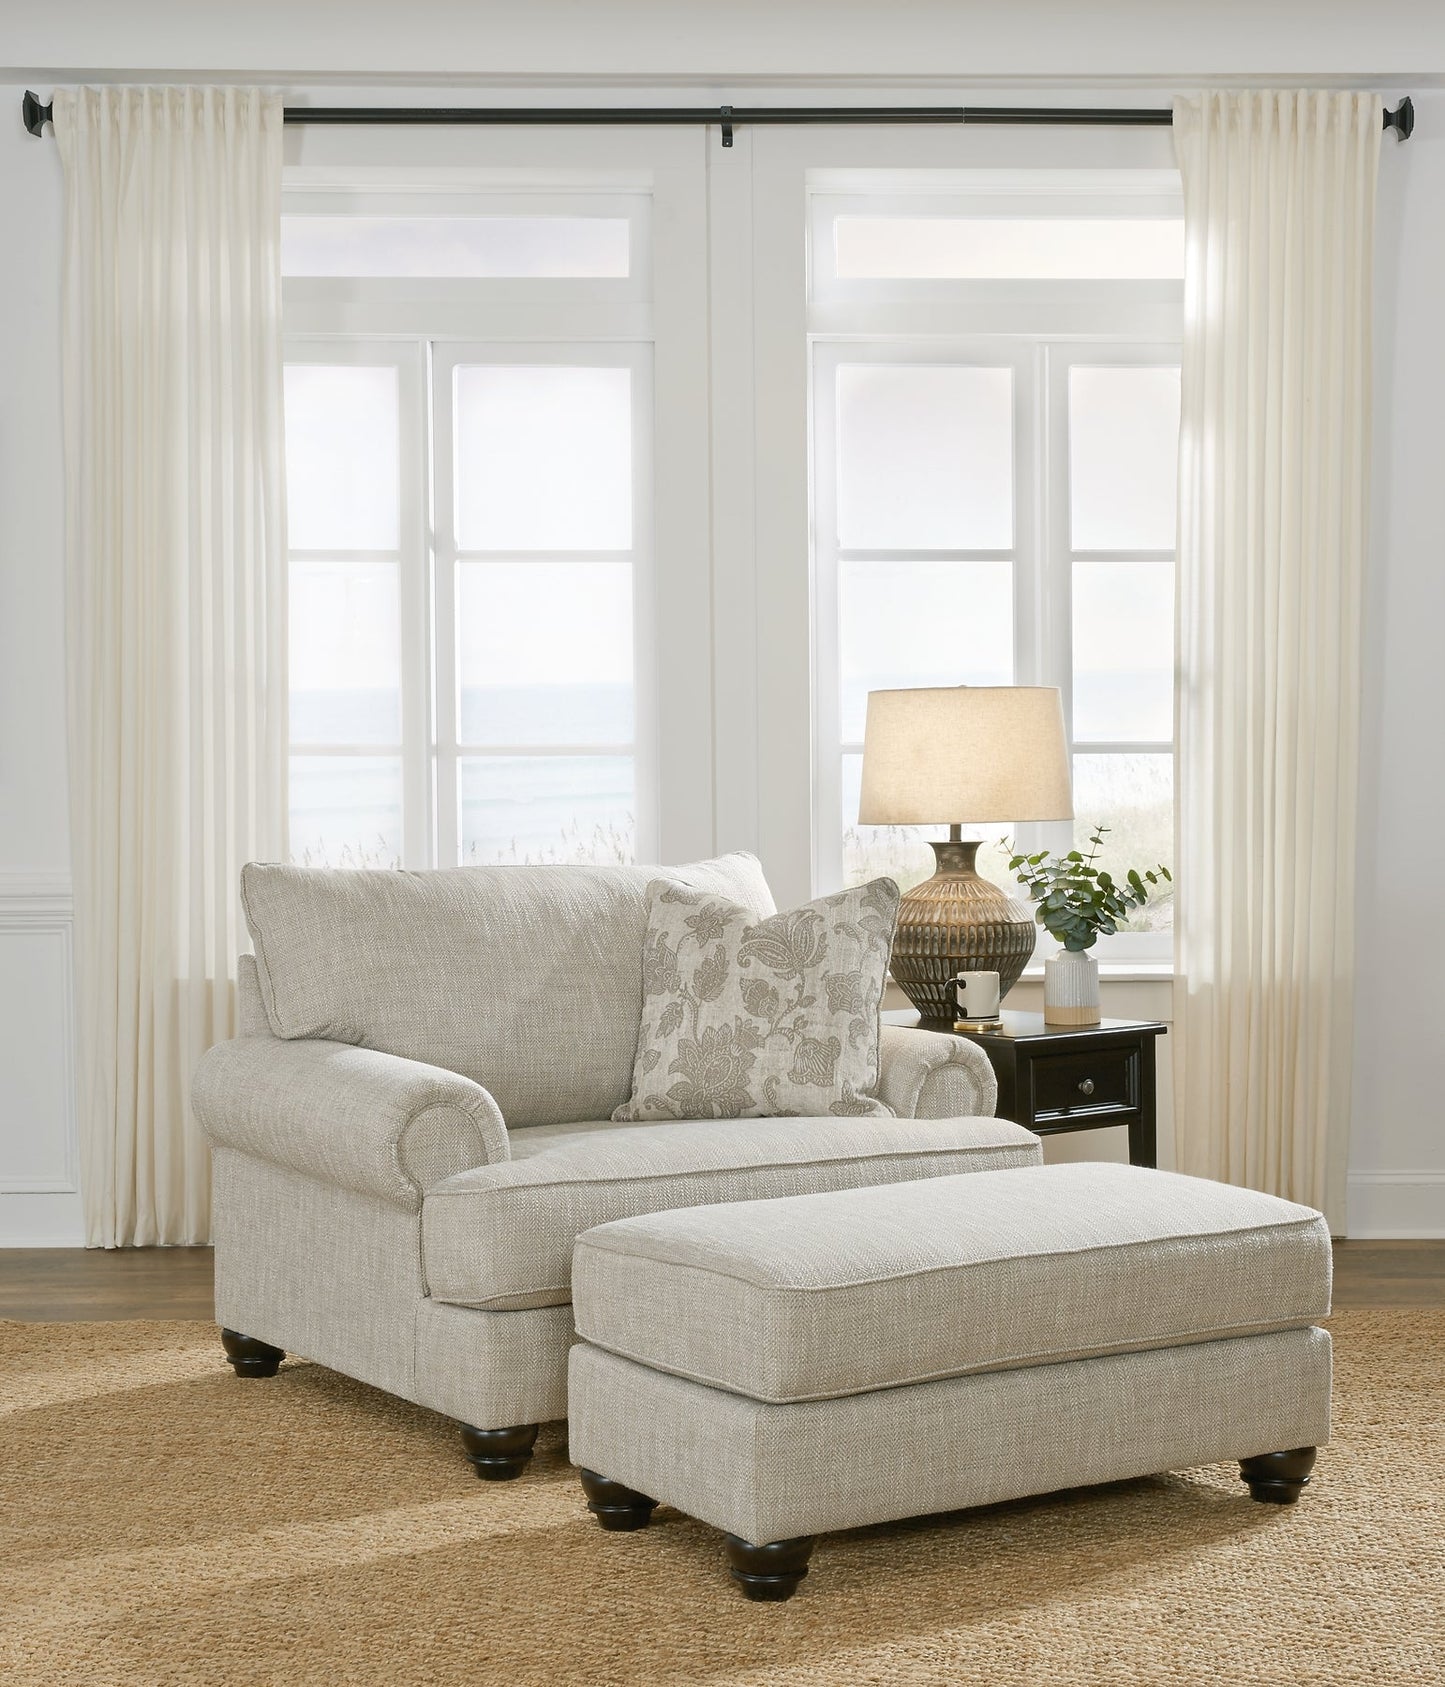 Asanti Chair and Ottoman Rent Wise Rent To Own Jacksonville, Florida